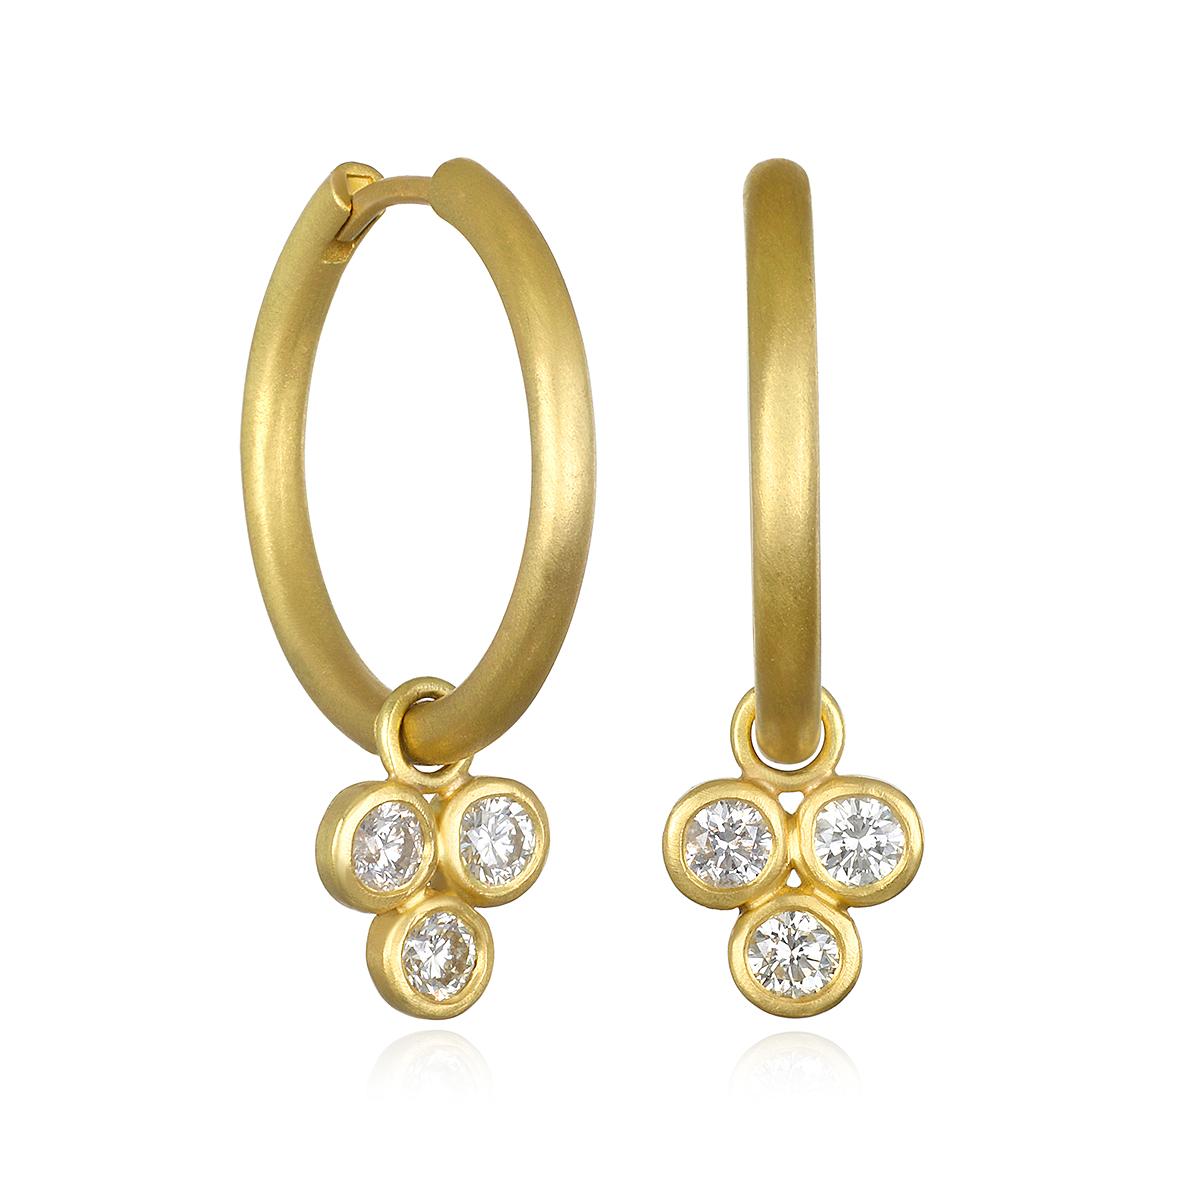 Faye Kim's 18 Karat Gold Hinged Burnished Diamond Hoops with Detachable Triple Diamond Drops - 
The hoops can be worn separately; they can also be worn with the diamonds in the front or reversed to show the gold side. The drops can be attached to